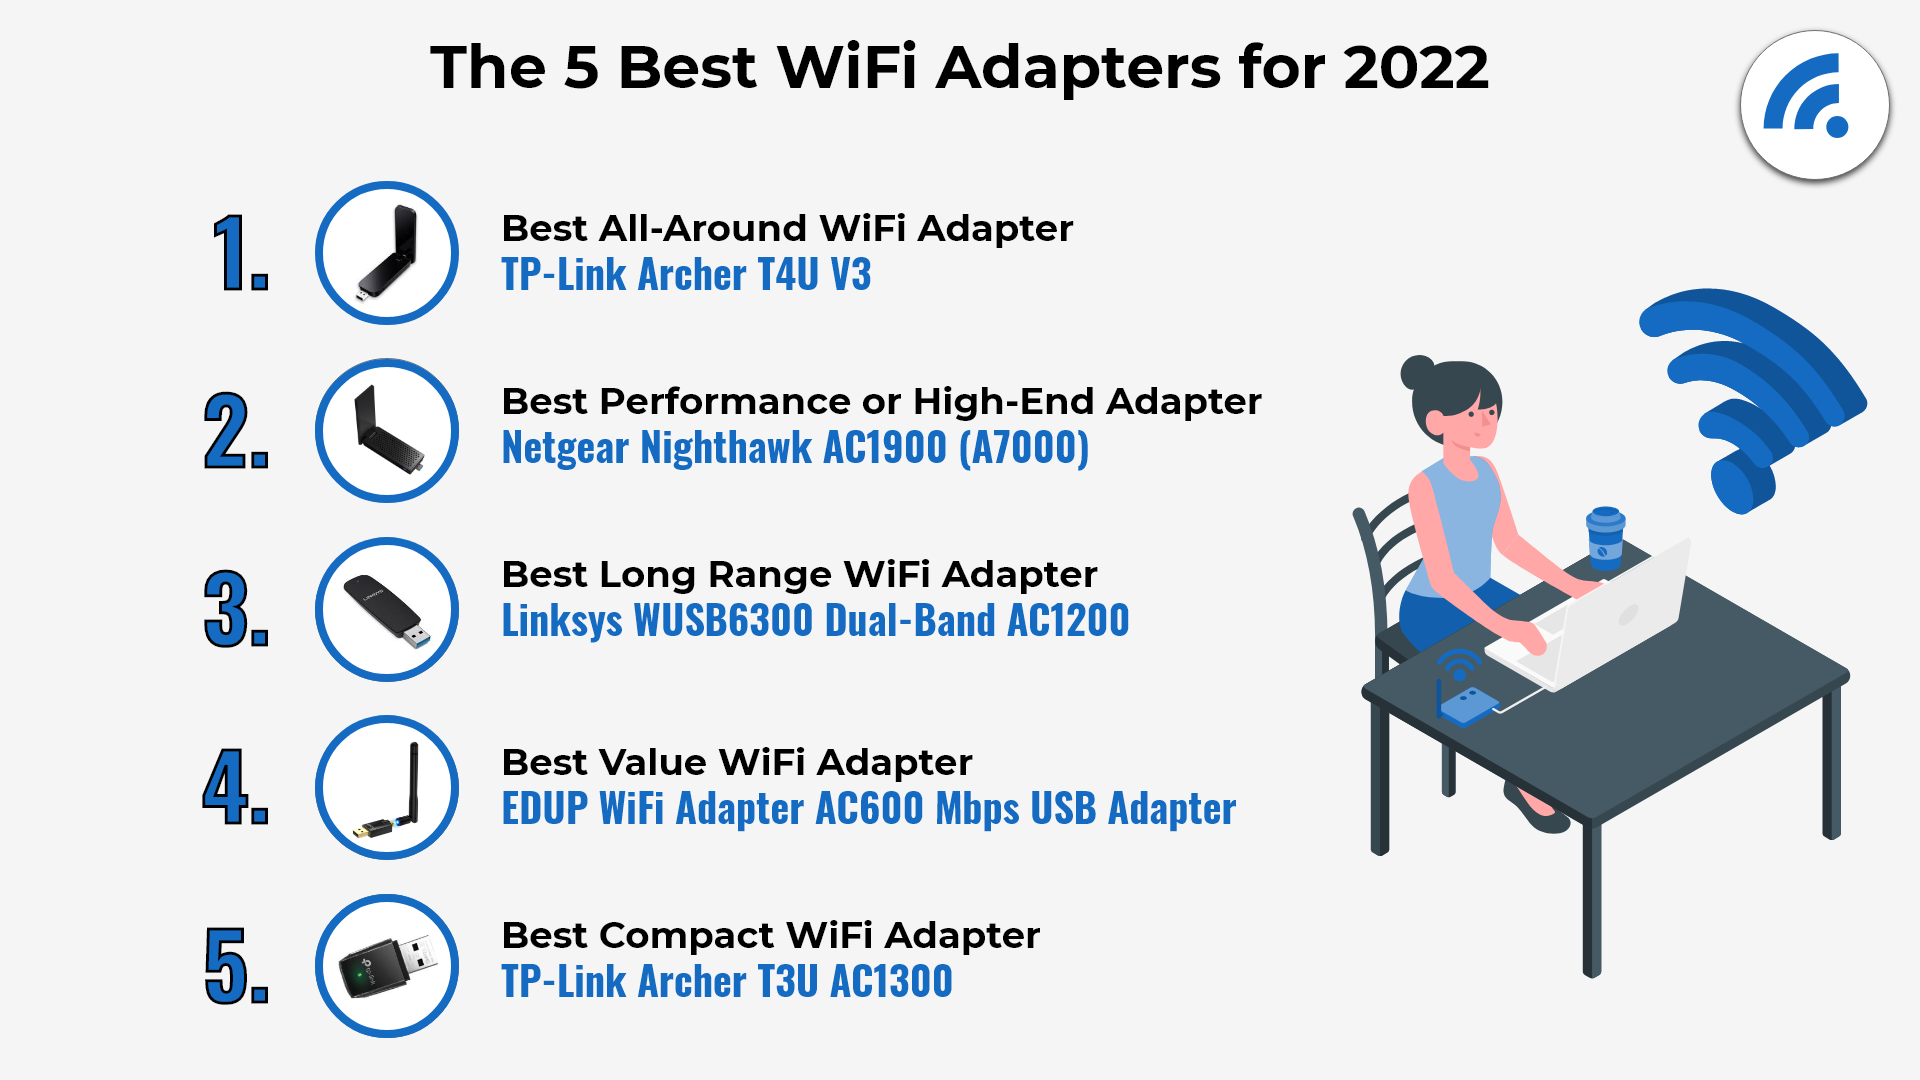 The 5 Best WiFi Adapters for 2022